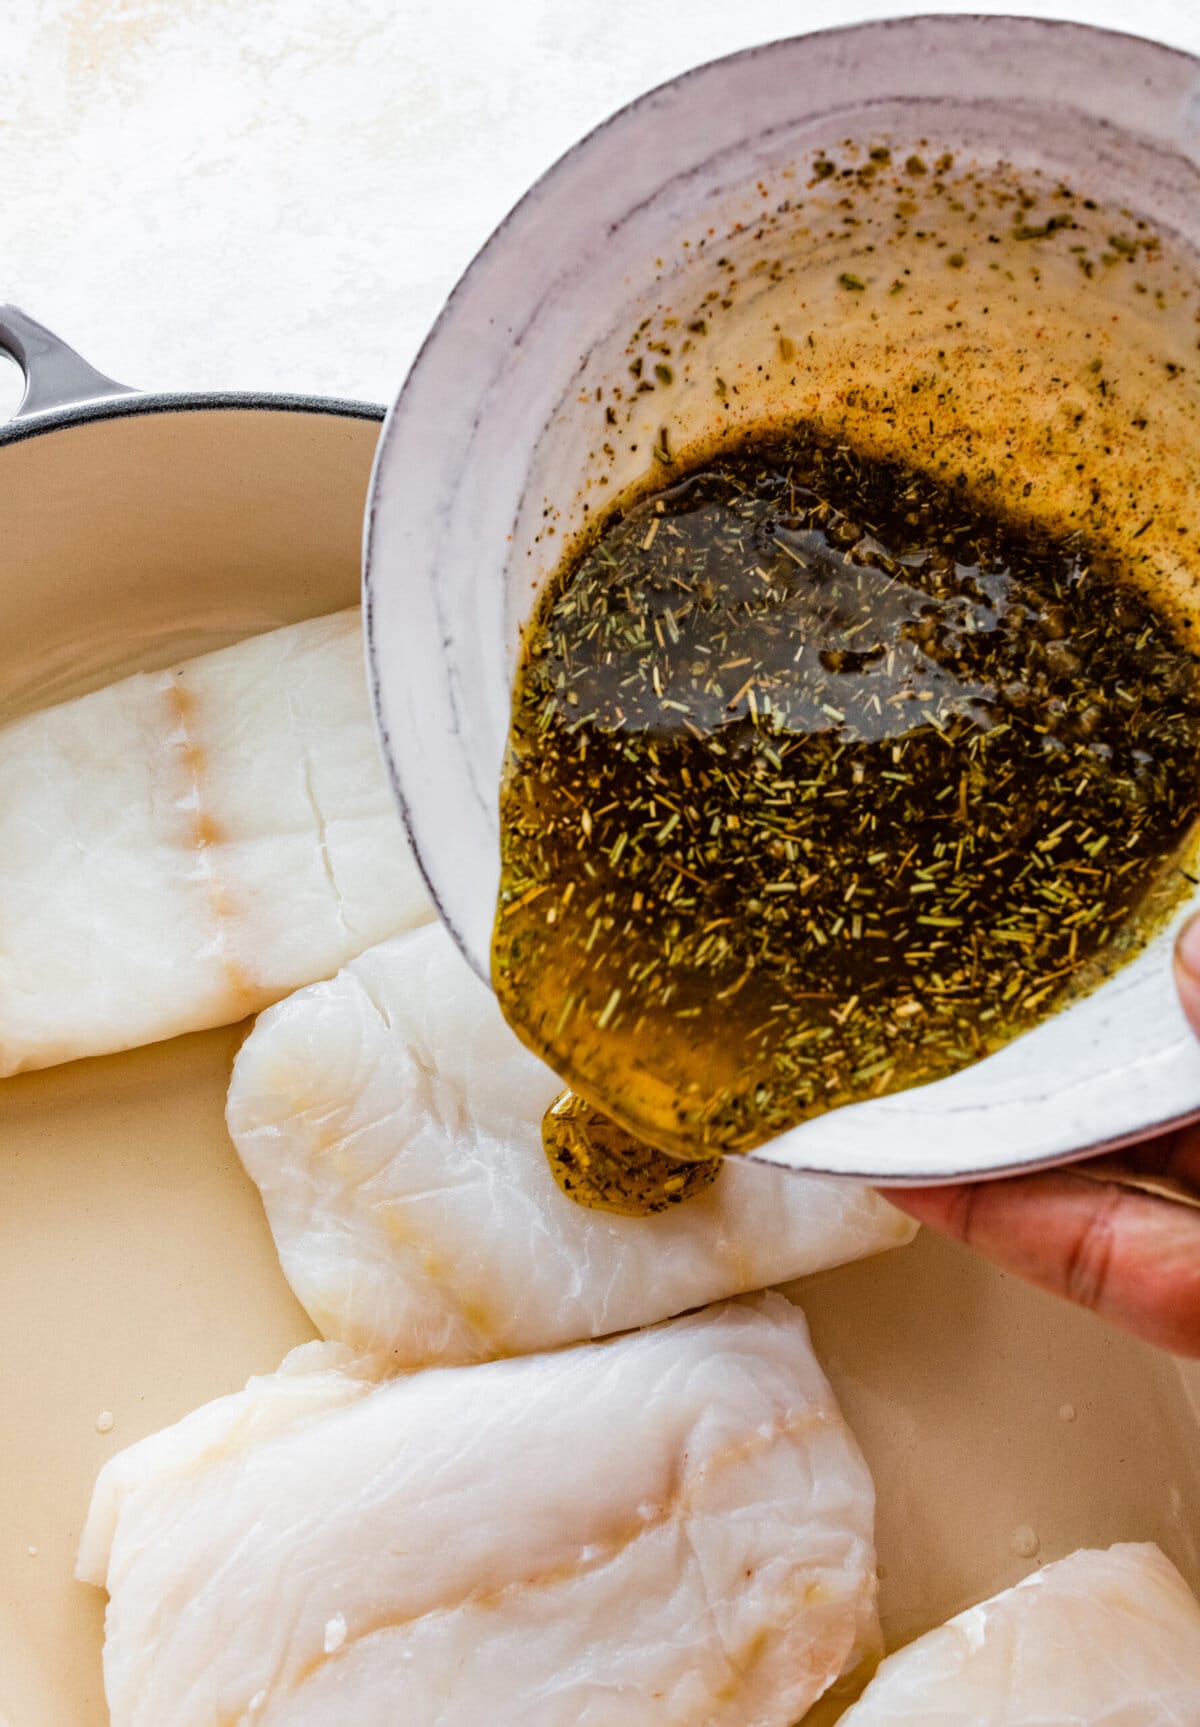 How to make easy oven baked cod step-by-step instructions: pour marinade on fish.